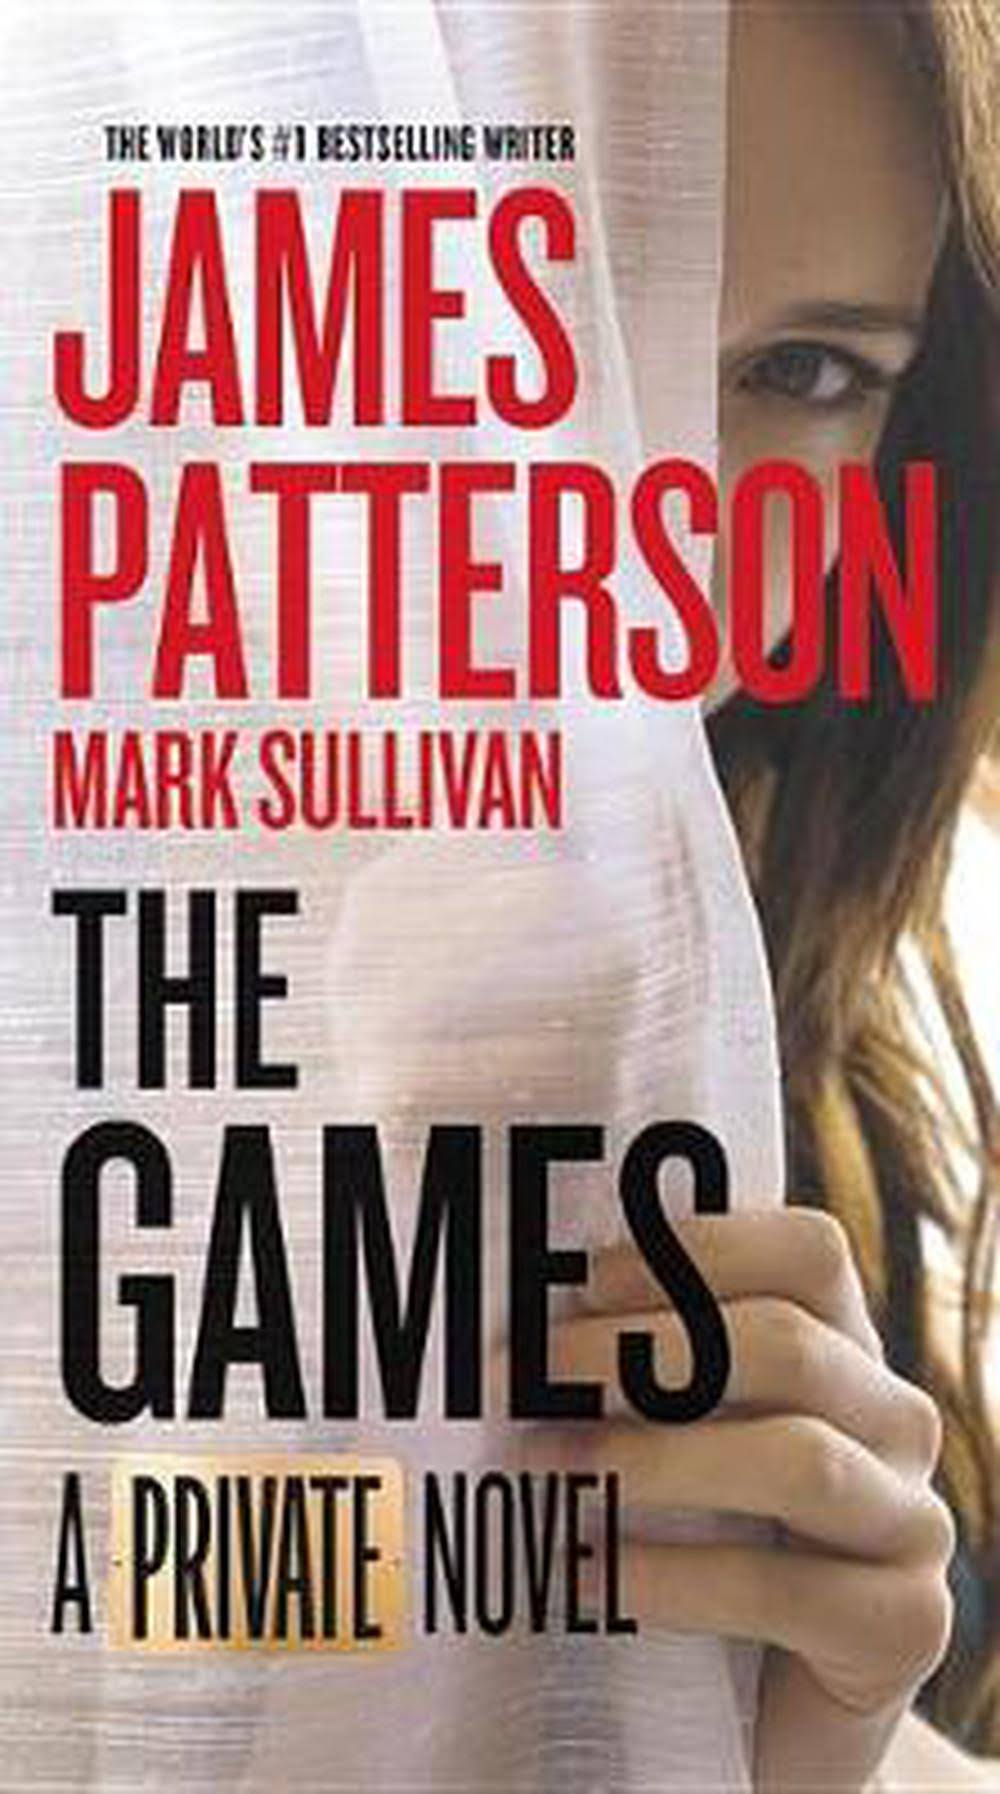 The Games [Book]